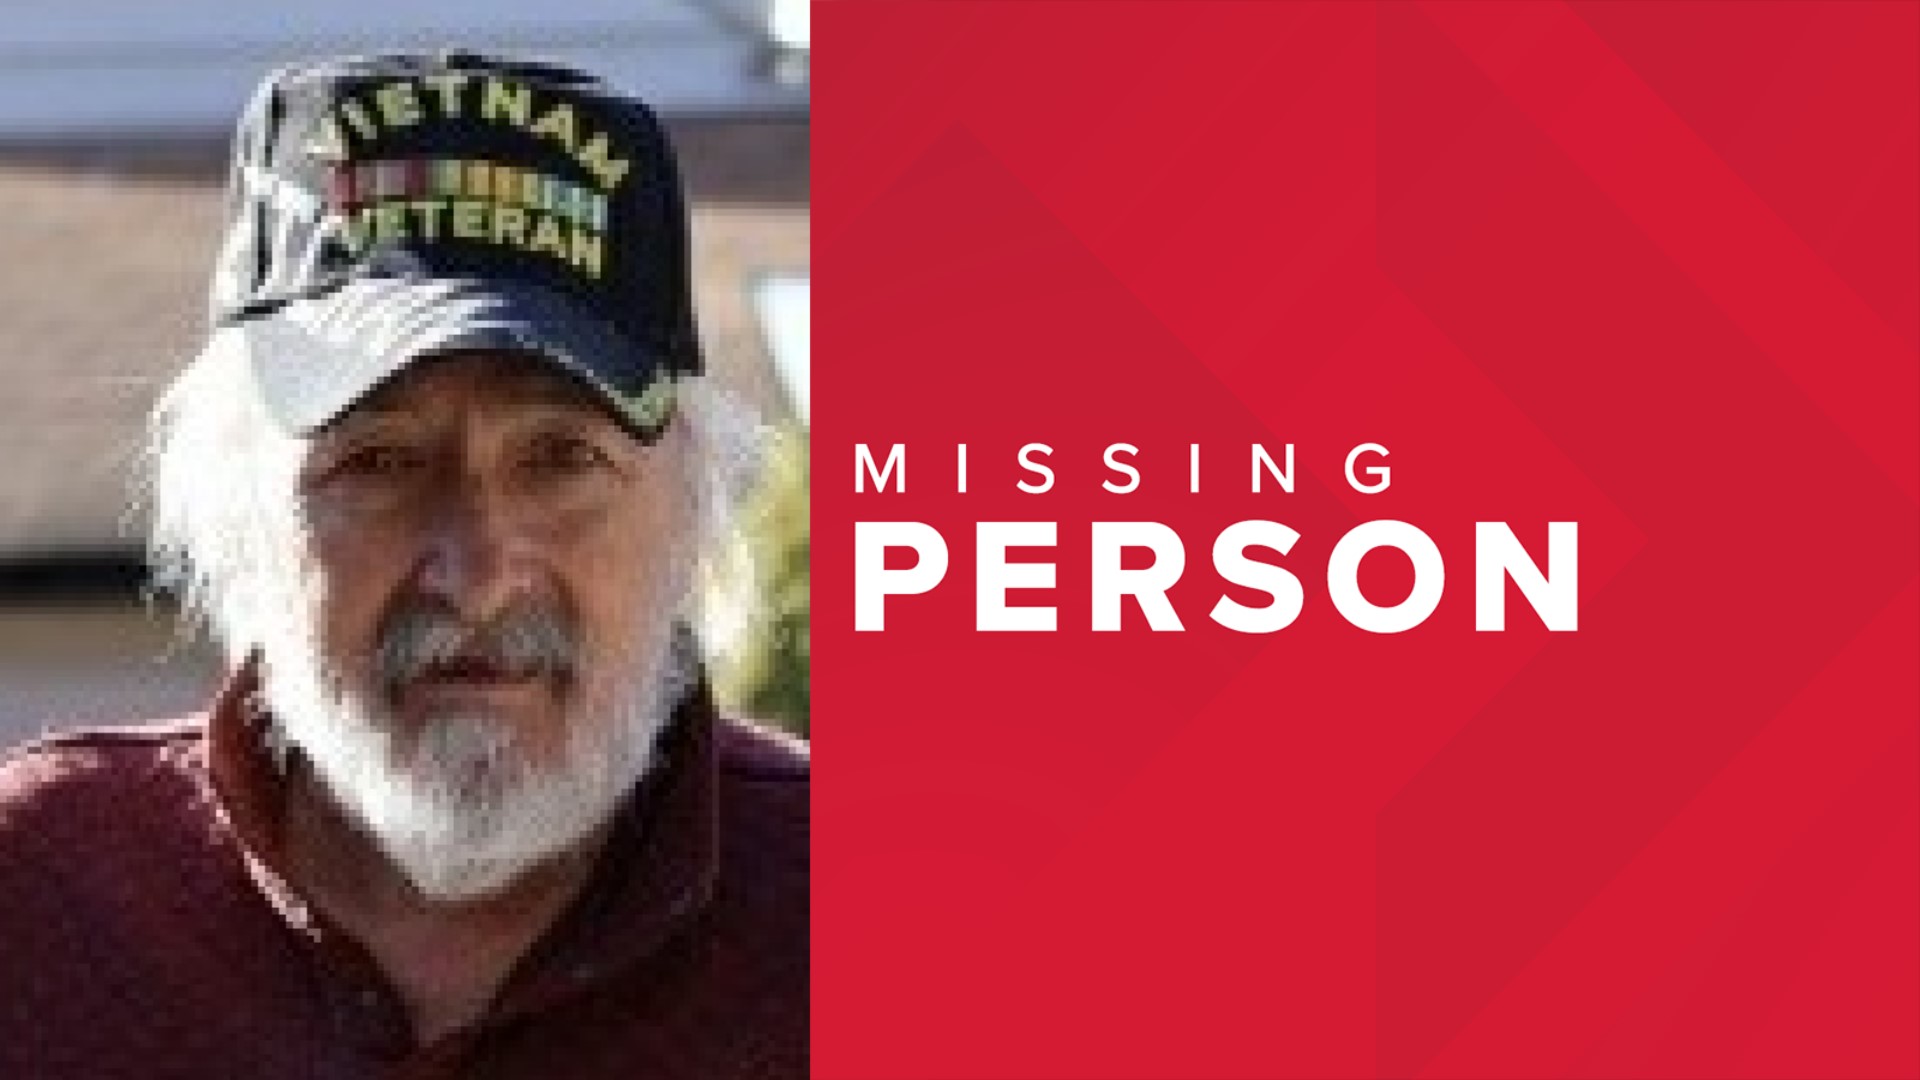 The 75-year-old man was last seen Tuesday in Loyalsock Township.